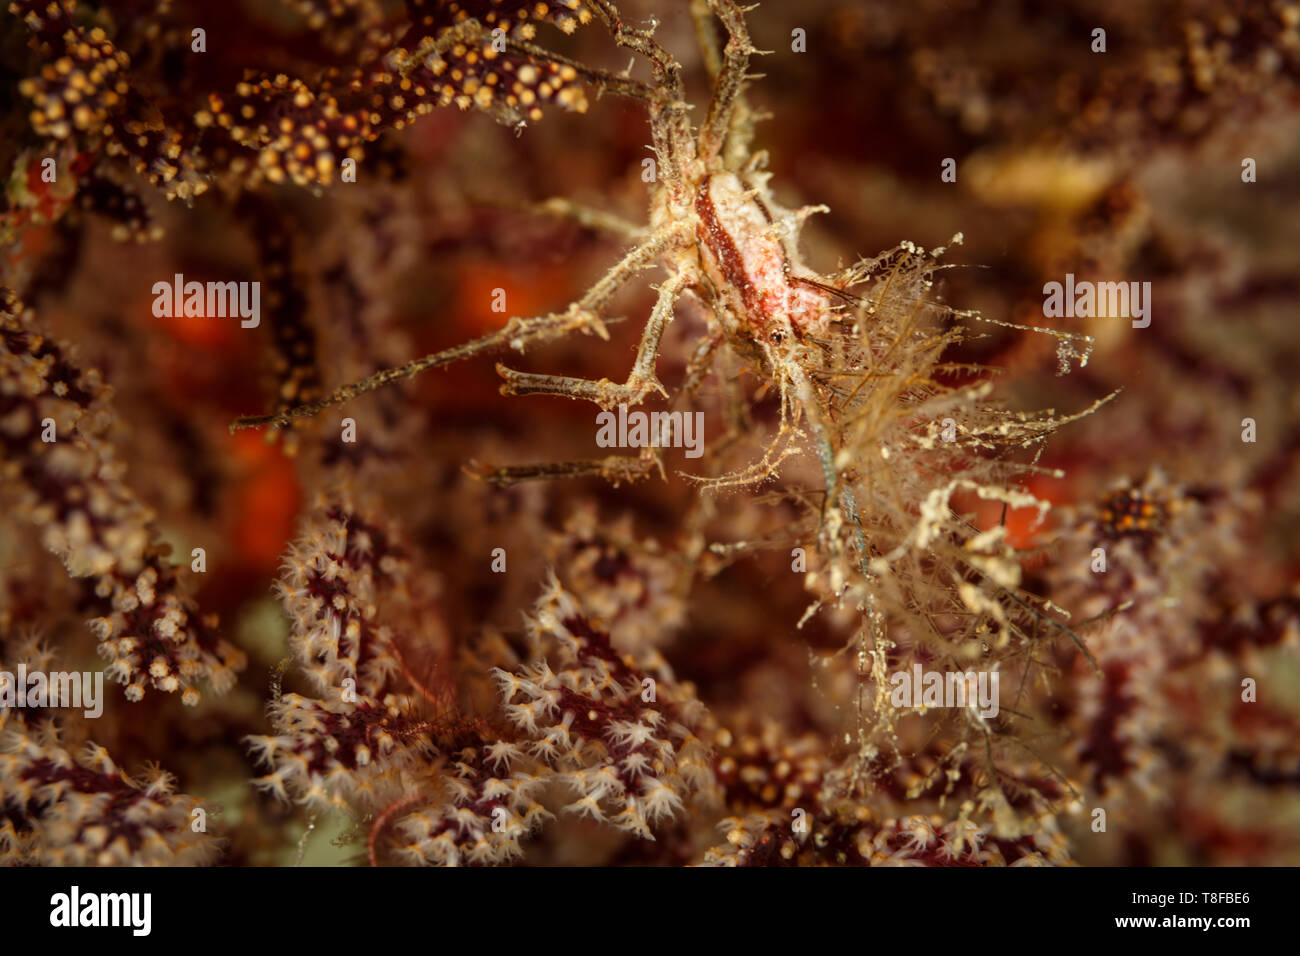 Closeup of skunk Cleaner Shrimp Lysmata Amboinensis, aka Scarlet cleaner Shrimp, Northern Cleaner Shrimp, near red tree sponge coral with white polyps Stock Photo